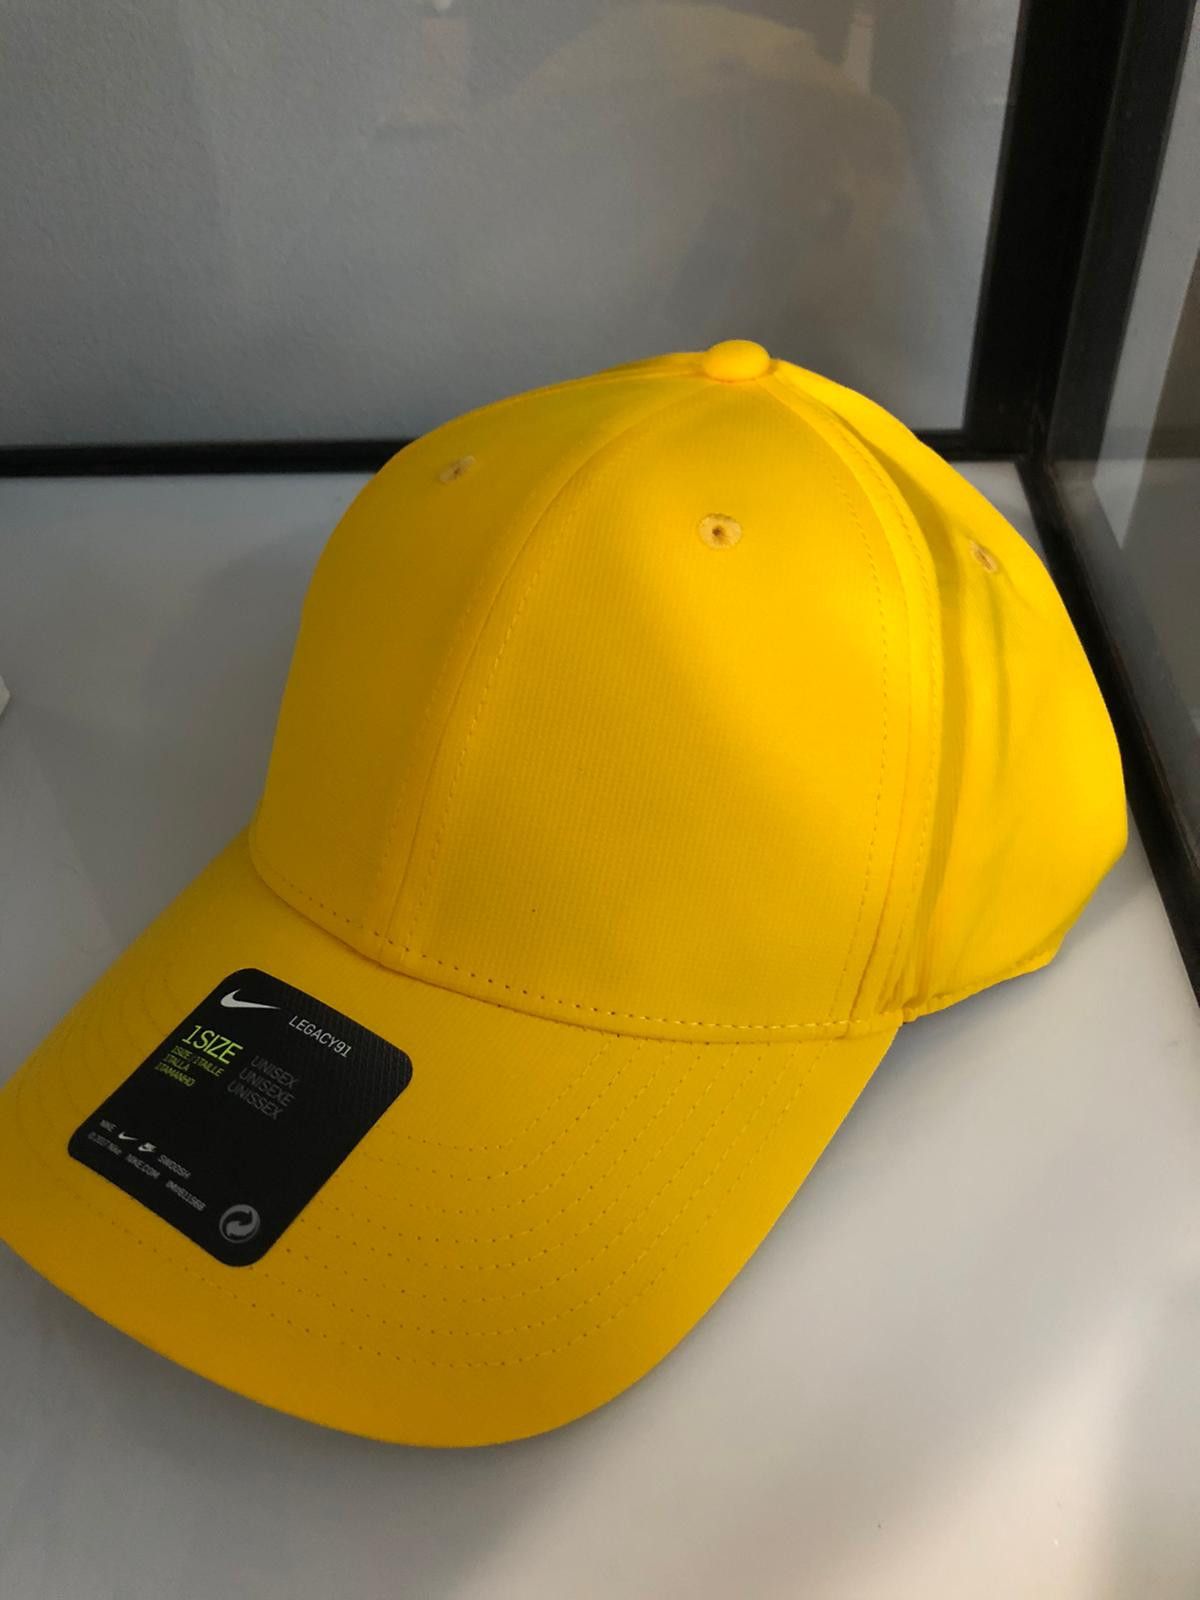 Nike New Nike men's Dri-FIT Tech Adjustable yellow Golf Hat Size ONE SIZE - 2 Preview